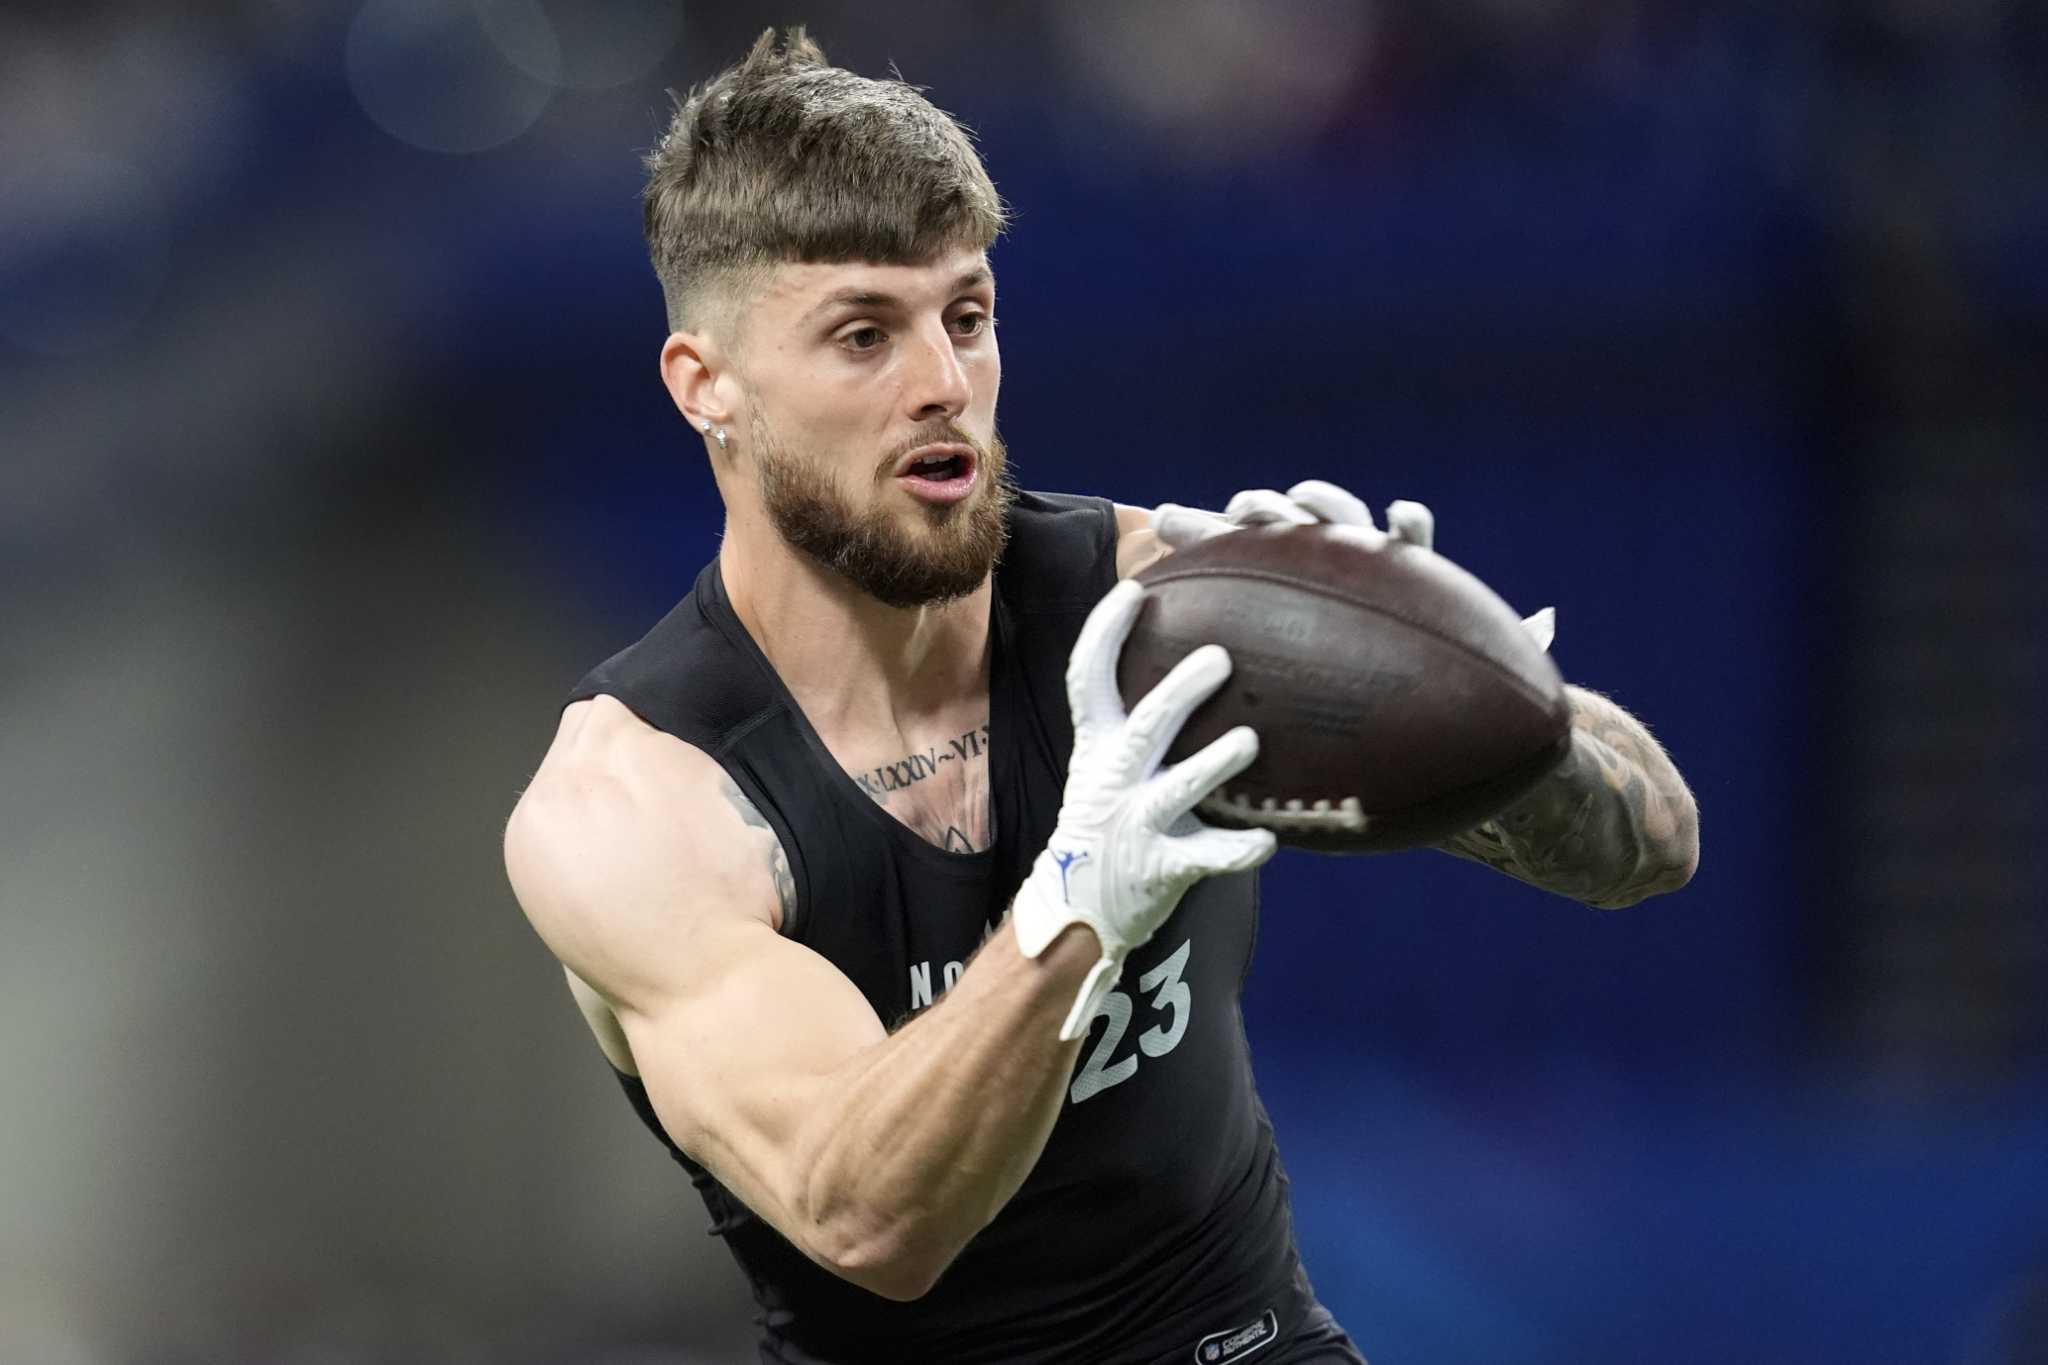 The 49ers take Florida receiver Ricky Pearsall with the 30th pick in the NFL draft